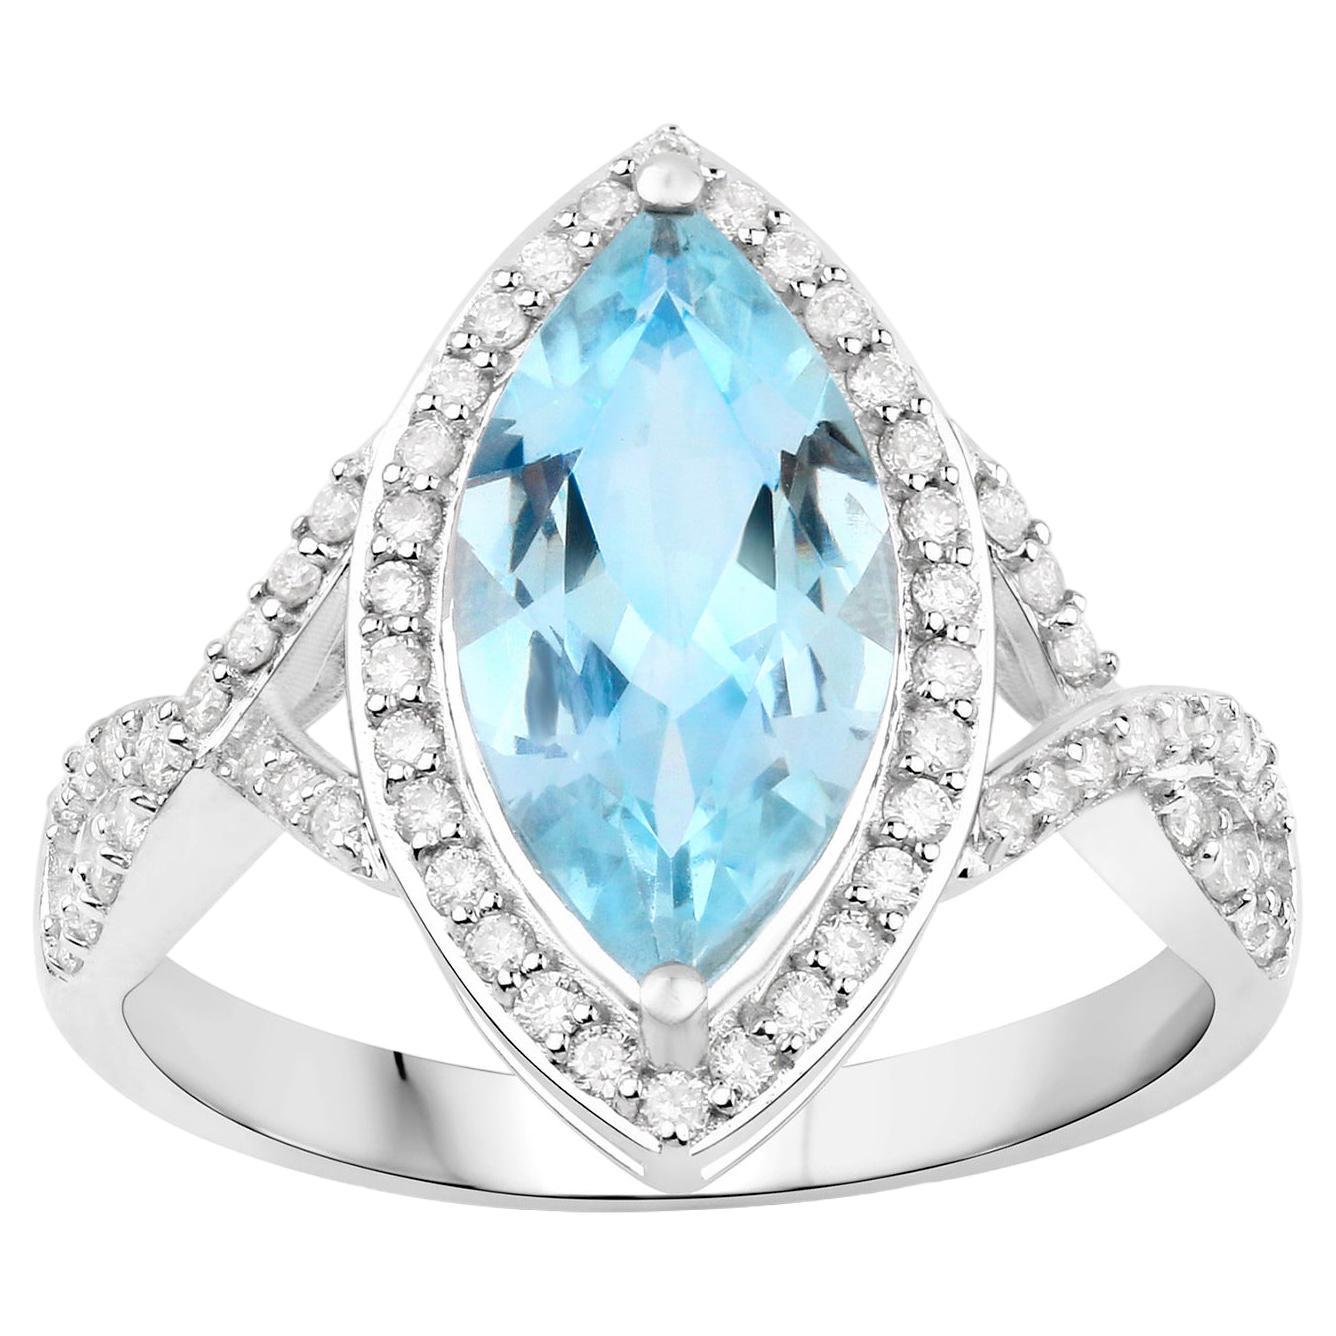 Aquamarine Ring With Diamonds 2.24 Carats 14K White Gold For Sale